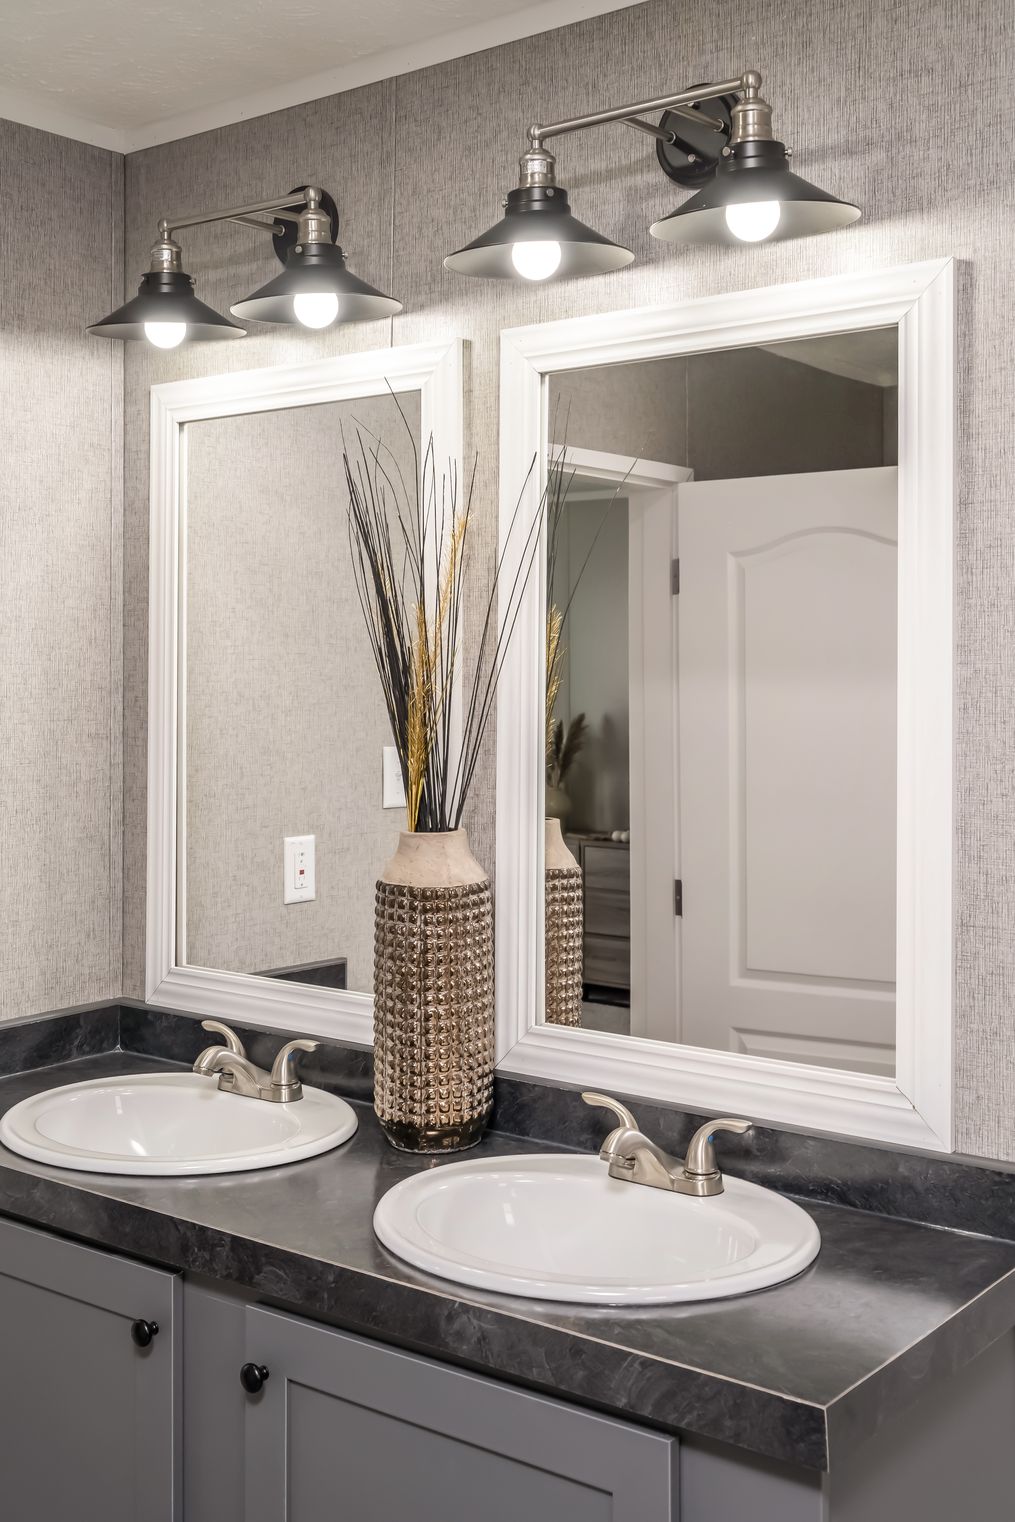 The TRADITION 60B Master Bathroom. This Manufactured Mobile Home features 3 bedrooms and 2 baths.